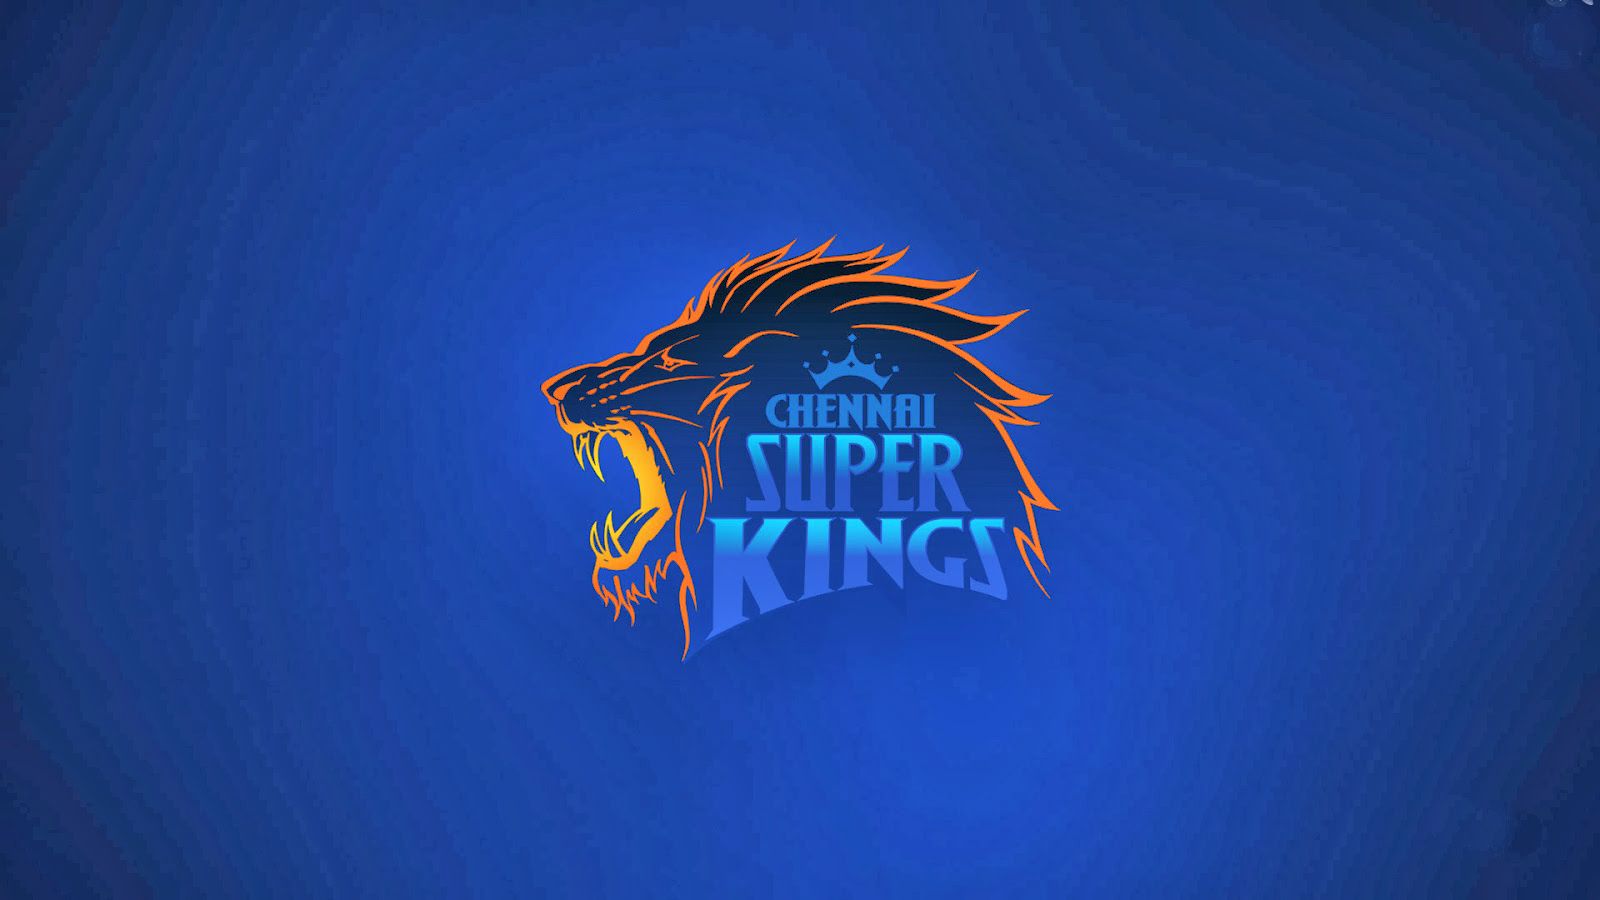 Pin by NewBioIdea on Cricket | Ms dhoni photos, Chennai super kings, Ms  dhoni wallpapers